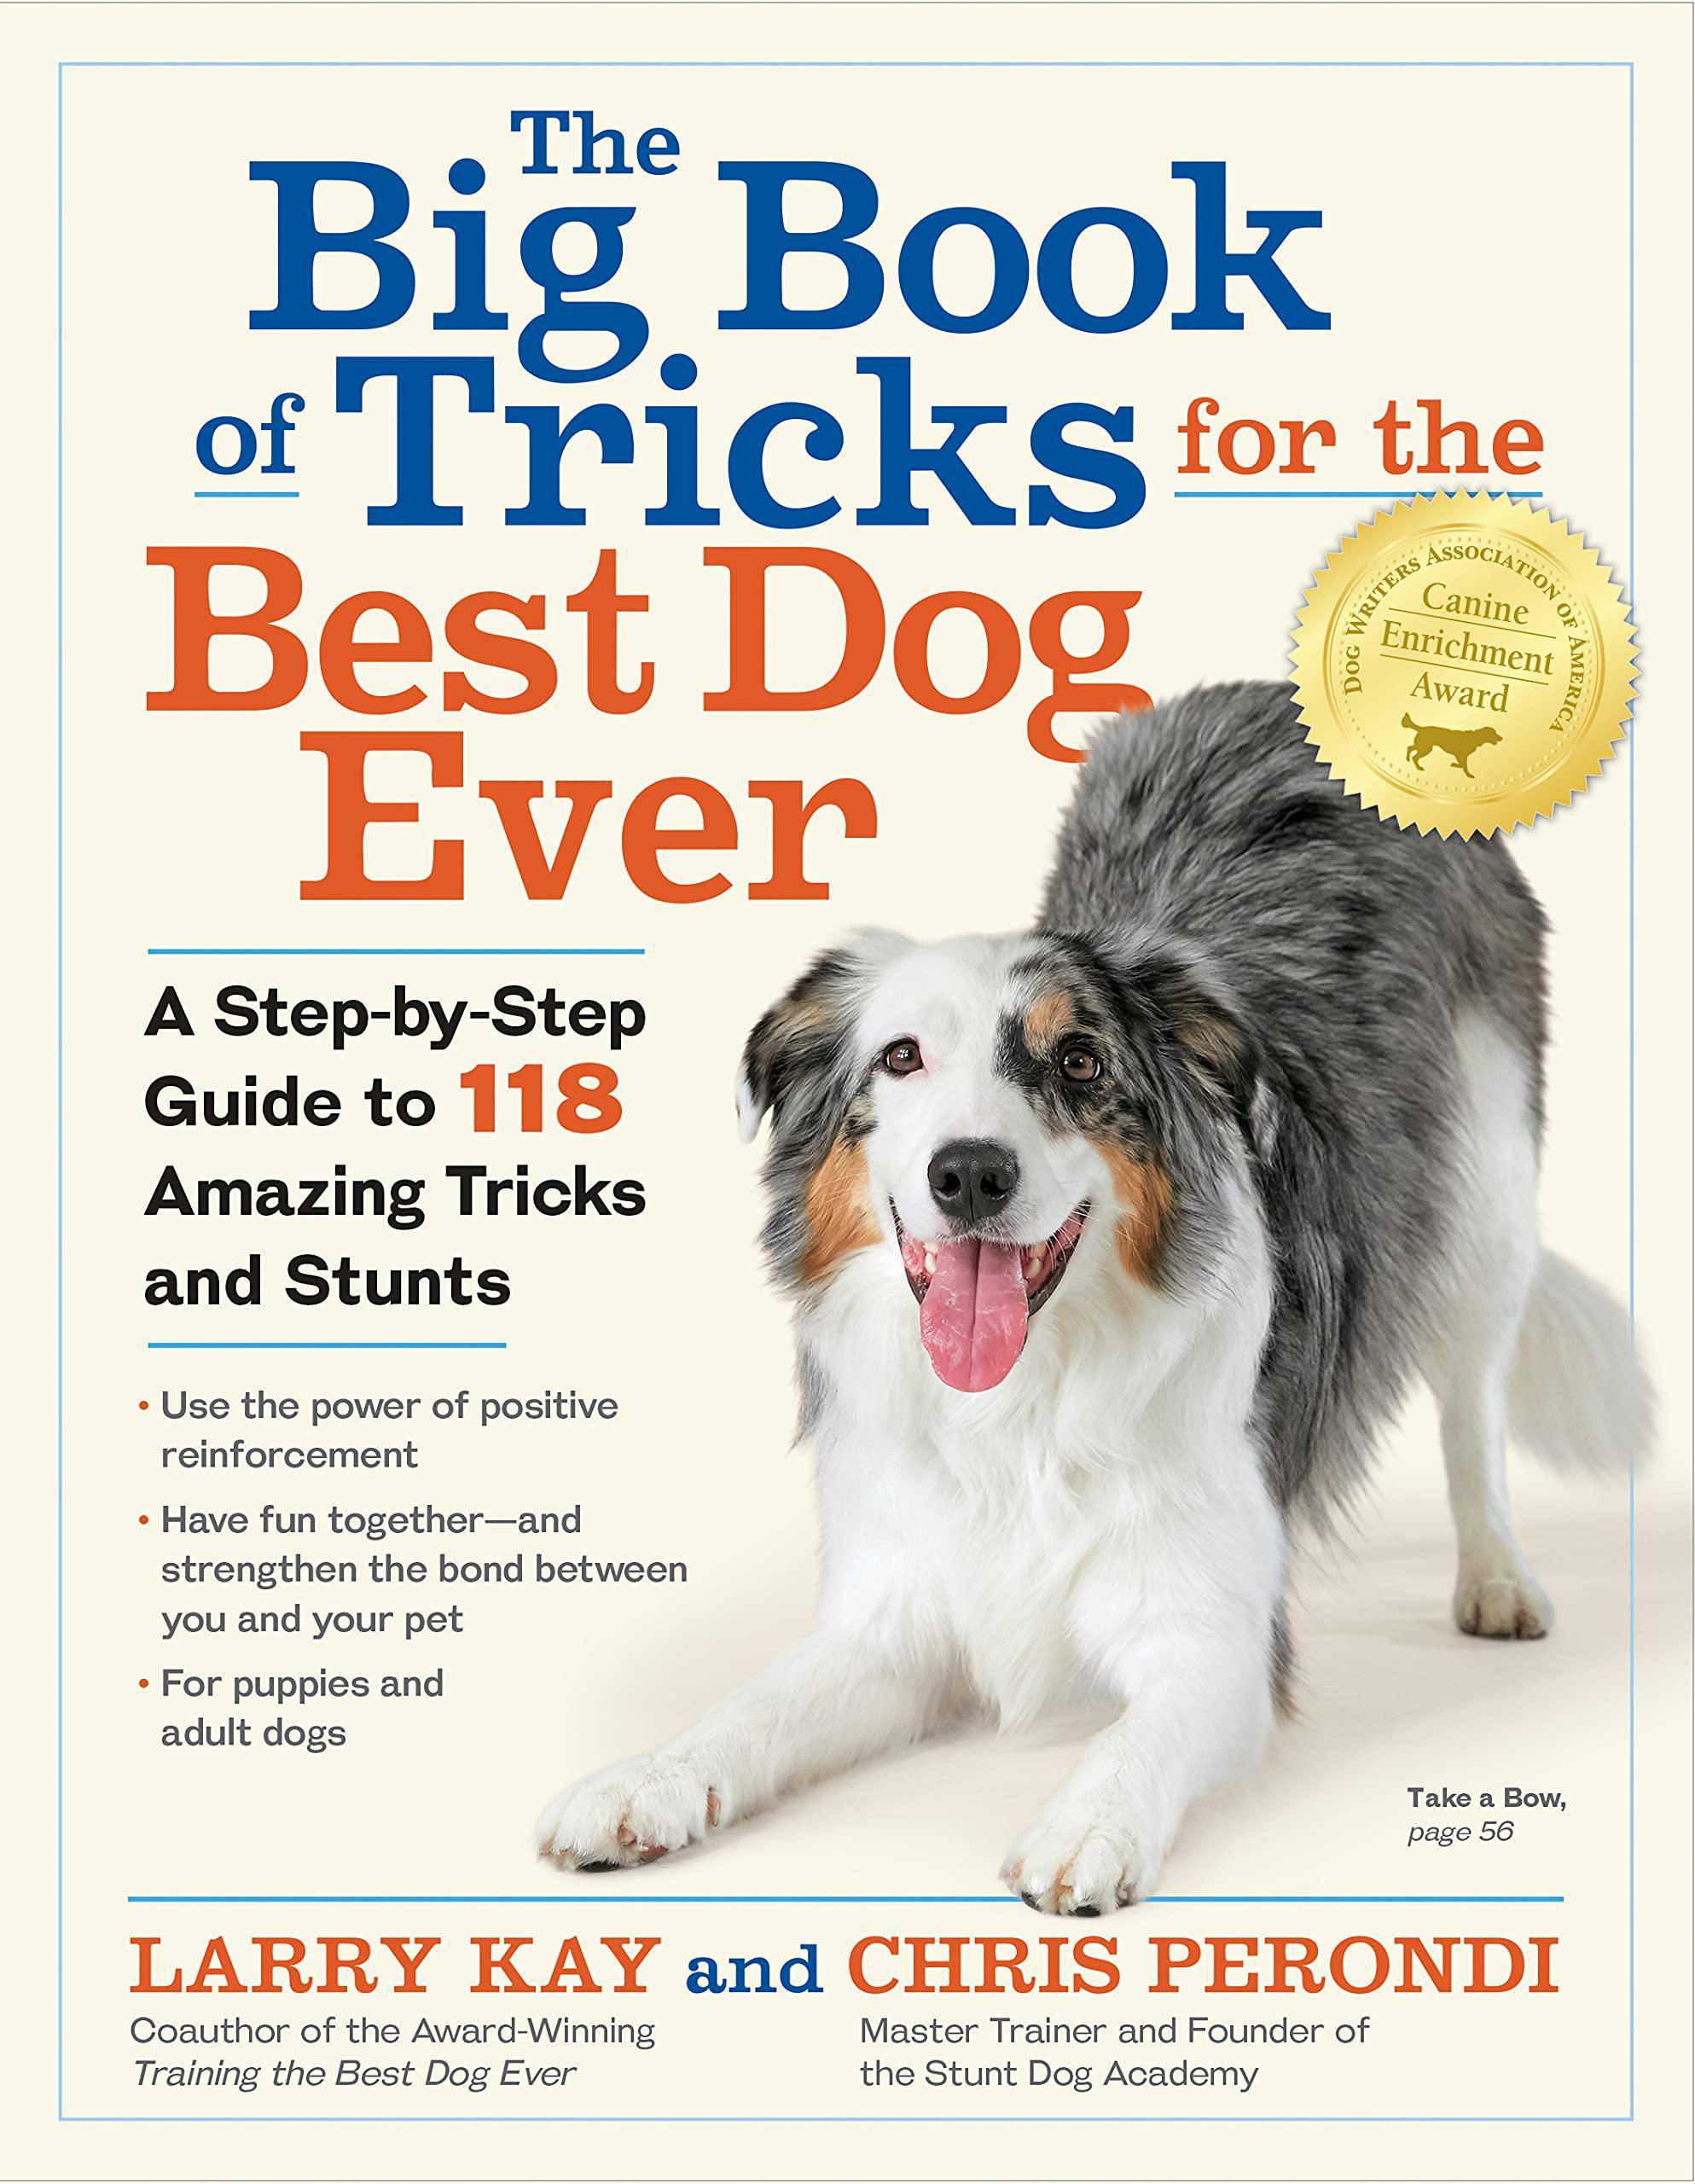 The Big Book of Tricks for the Best Dog Ever - SureShot Books Publishing LLC